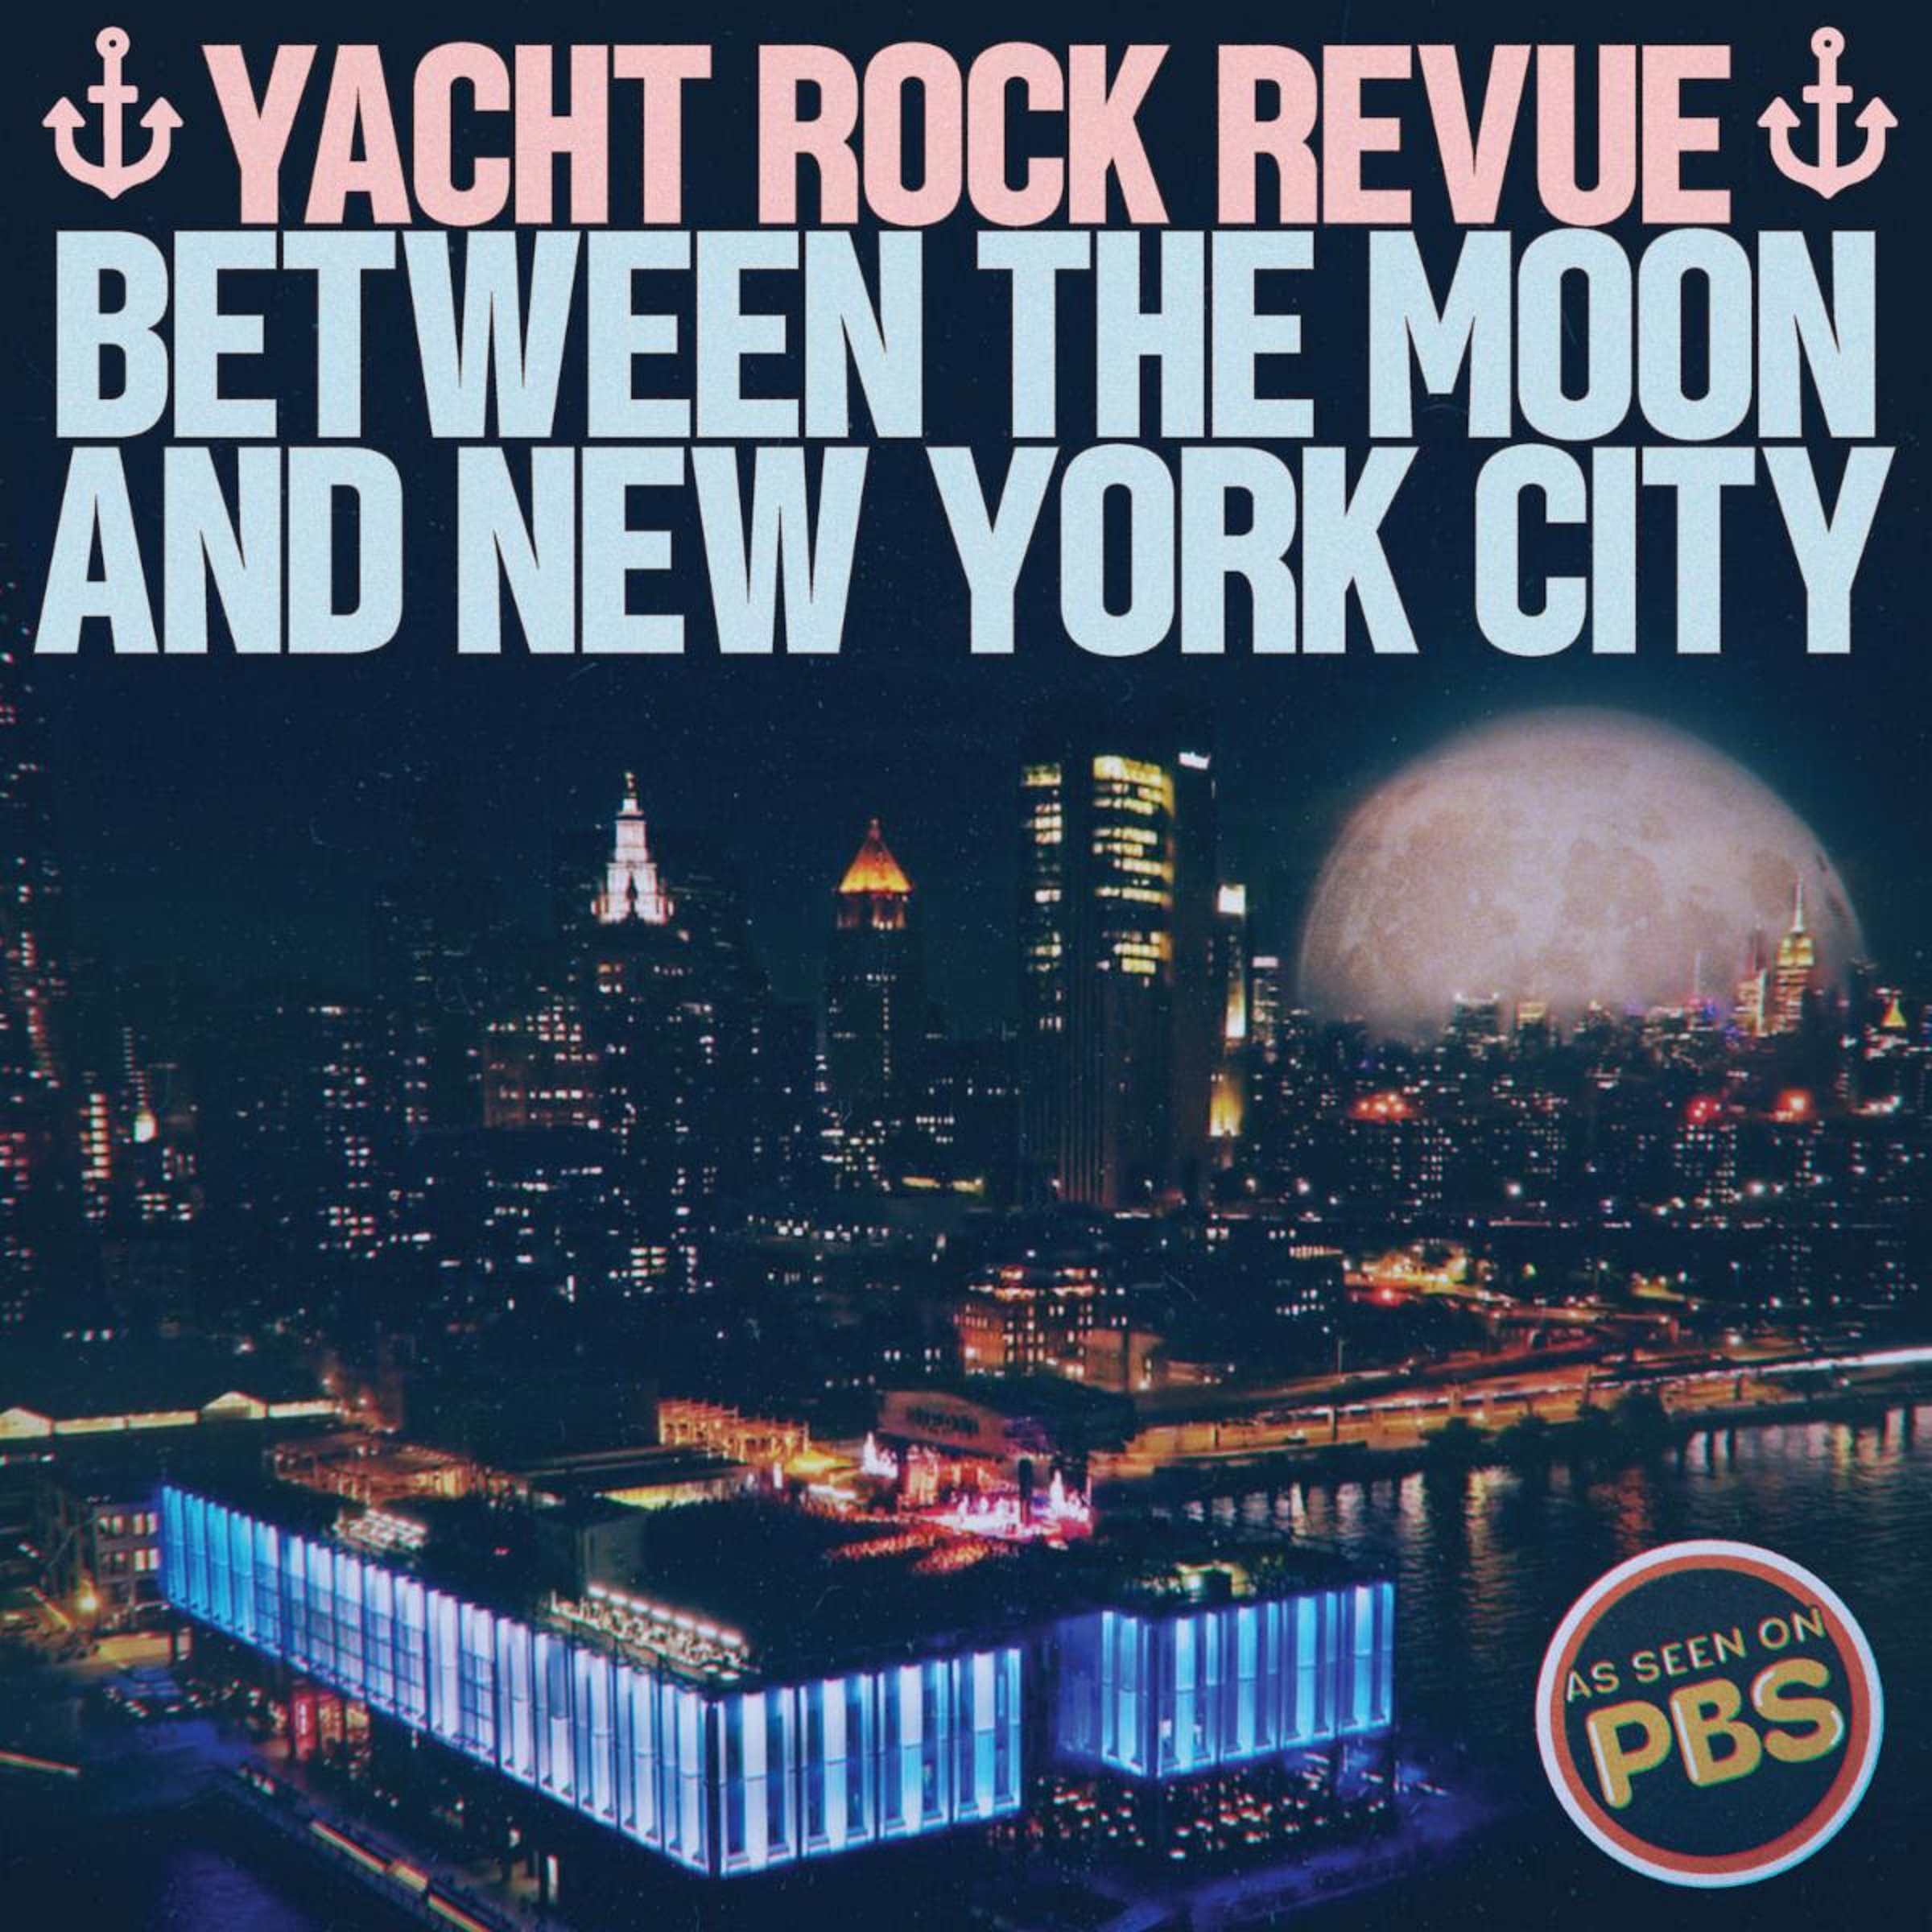 Yacht Rock Revue Release 'Between the Moon and New York City' Live Album From PBS Special